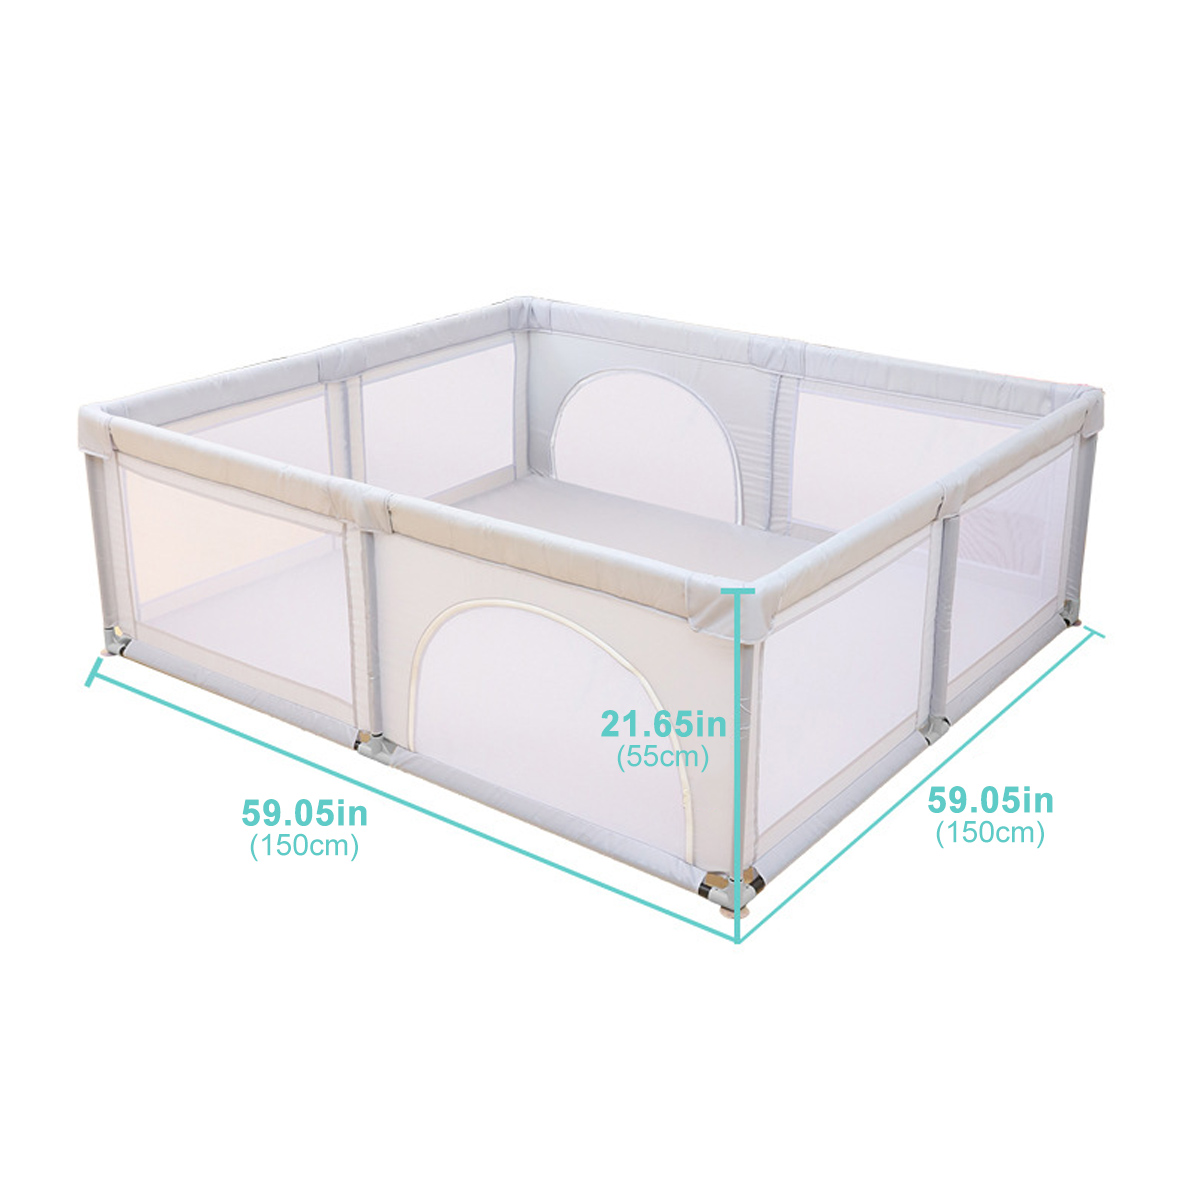 Bioby-15X15M-Childrens-Playground-furniture-Baby-Playpen-Bed-Barriers-Safety-Modular-Folding-Baby-Pa-1936073-16